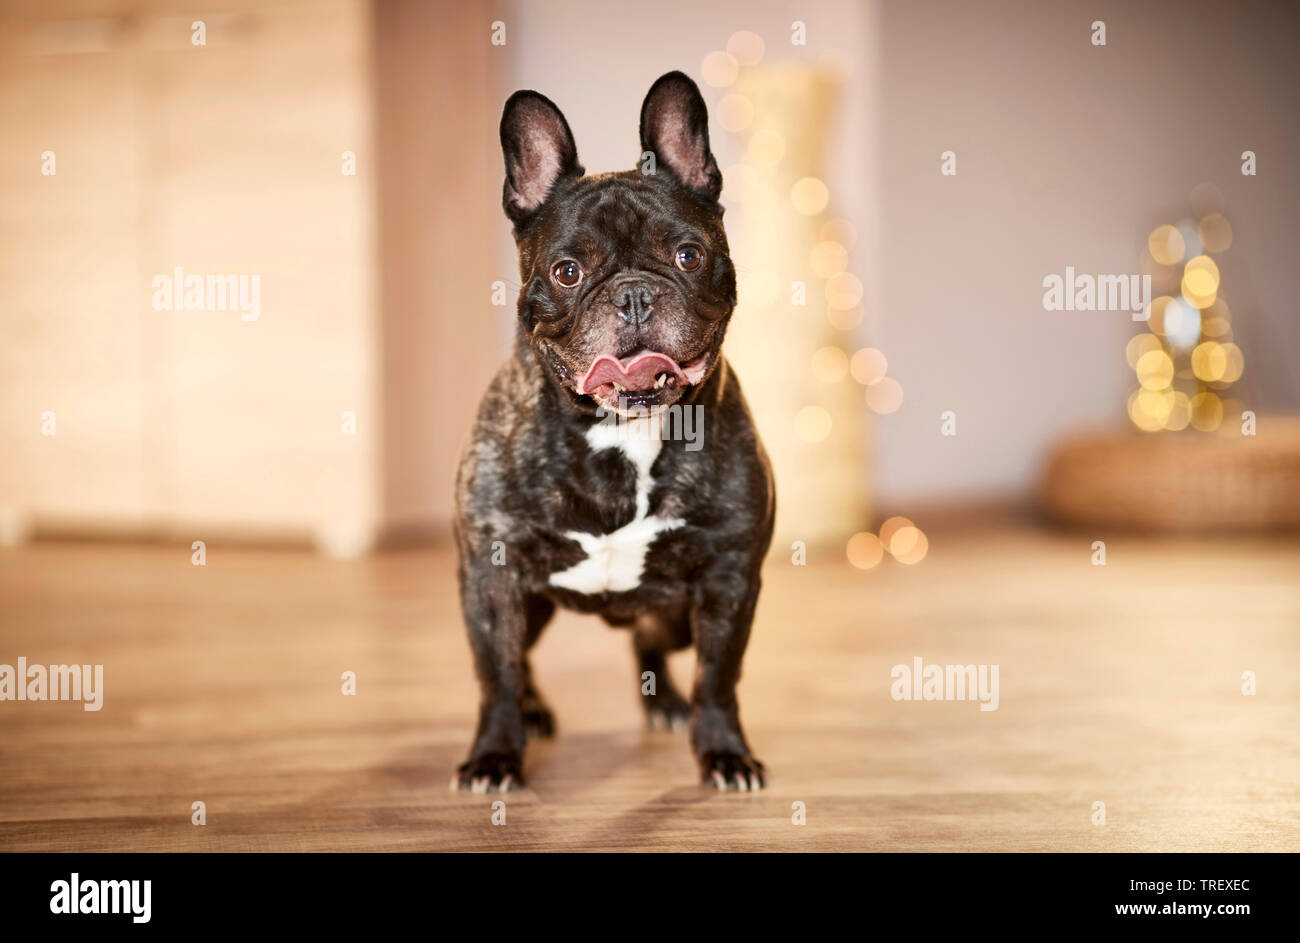 French Bulldog. Adult dog standing in an apartement decorated for Christmas. Germany Stock Photo